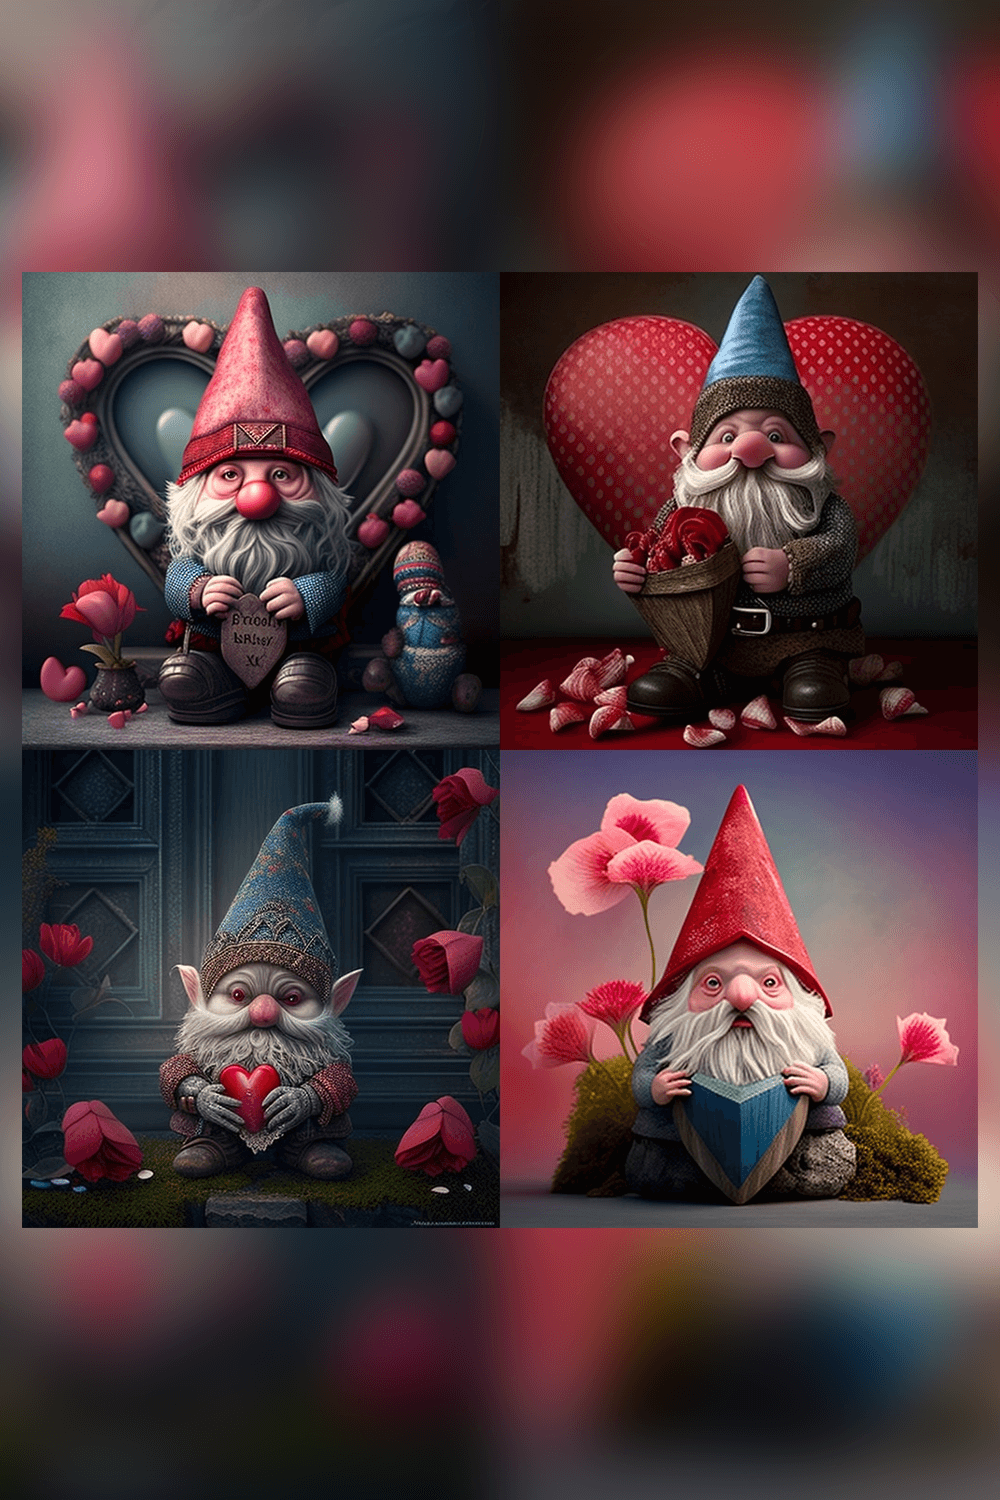 Series of photoshopped images of gnomes.